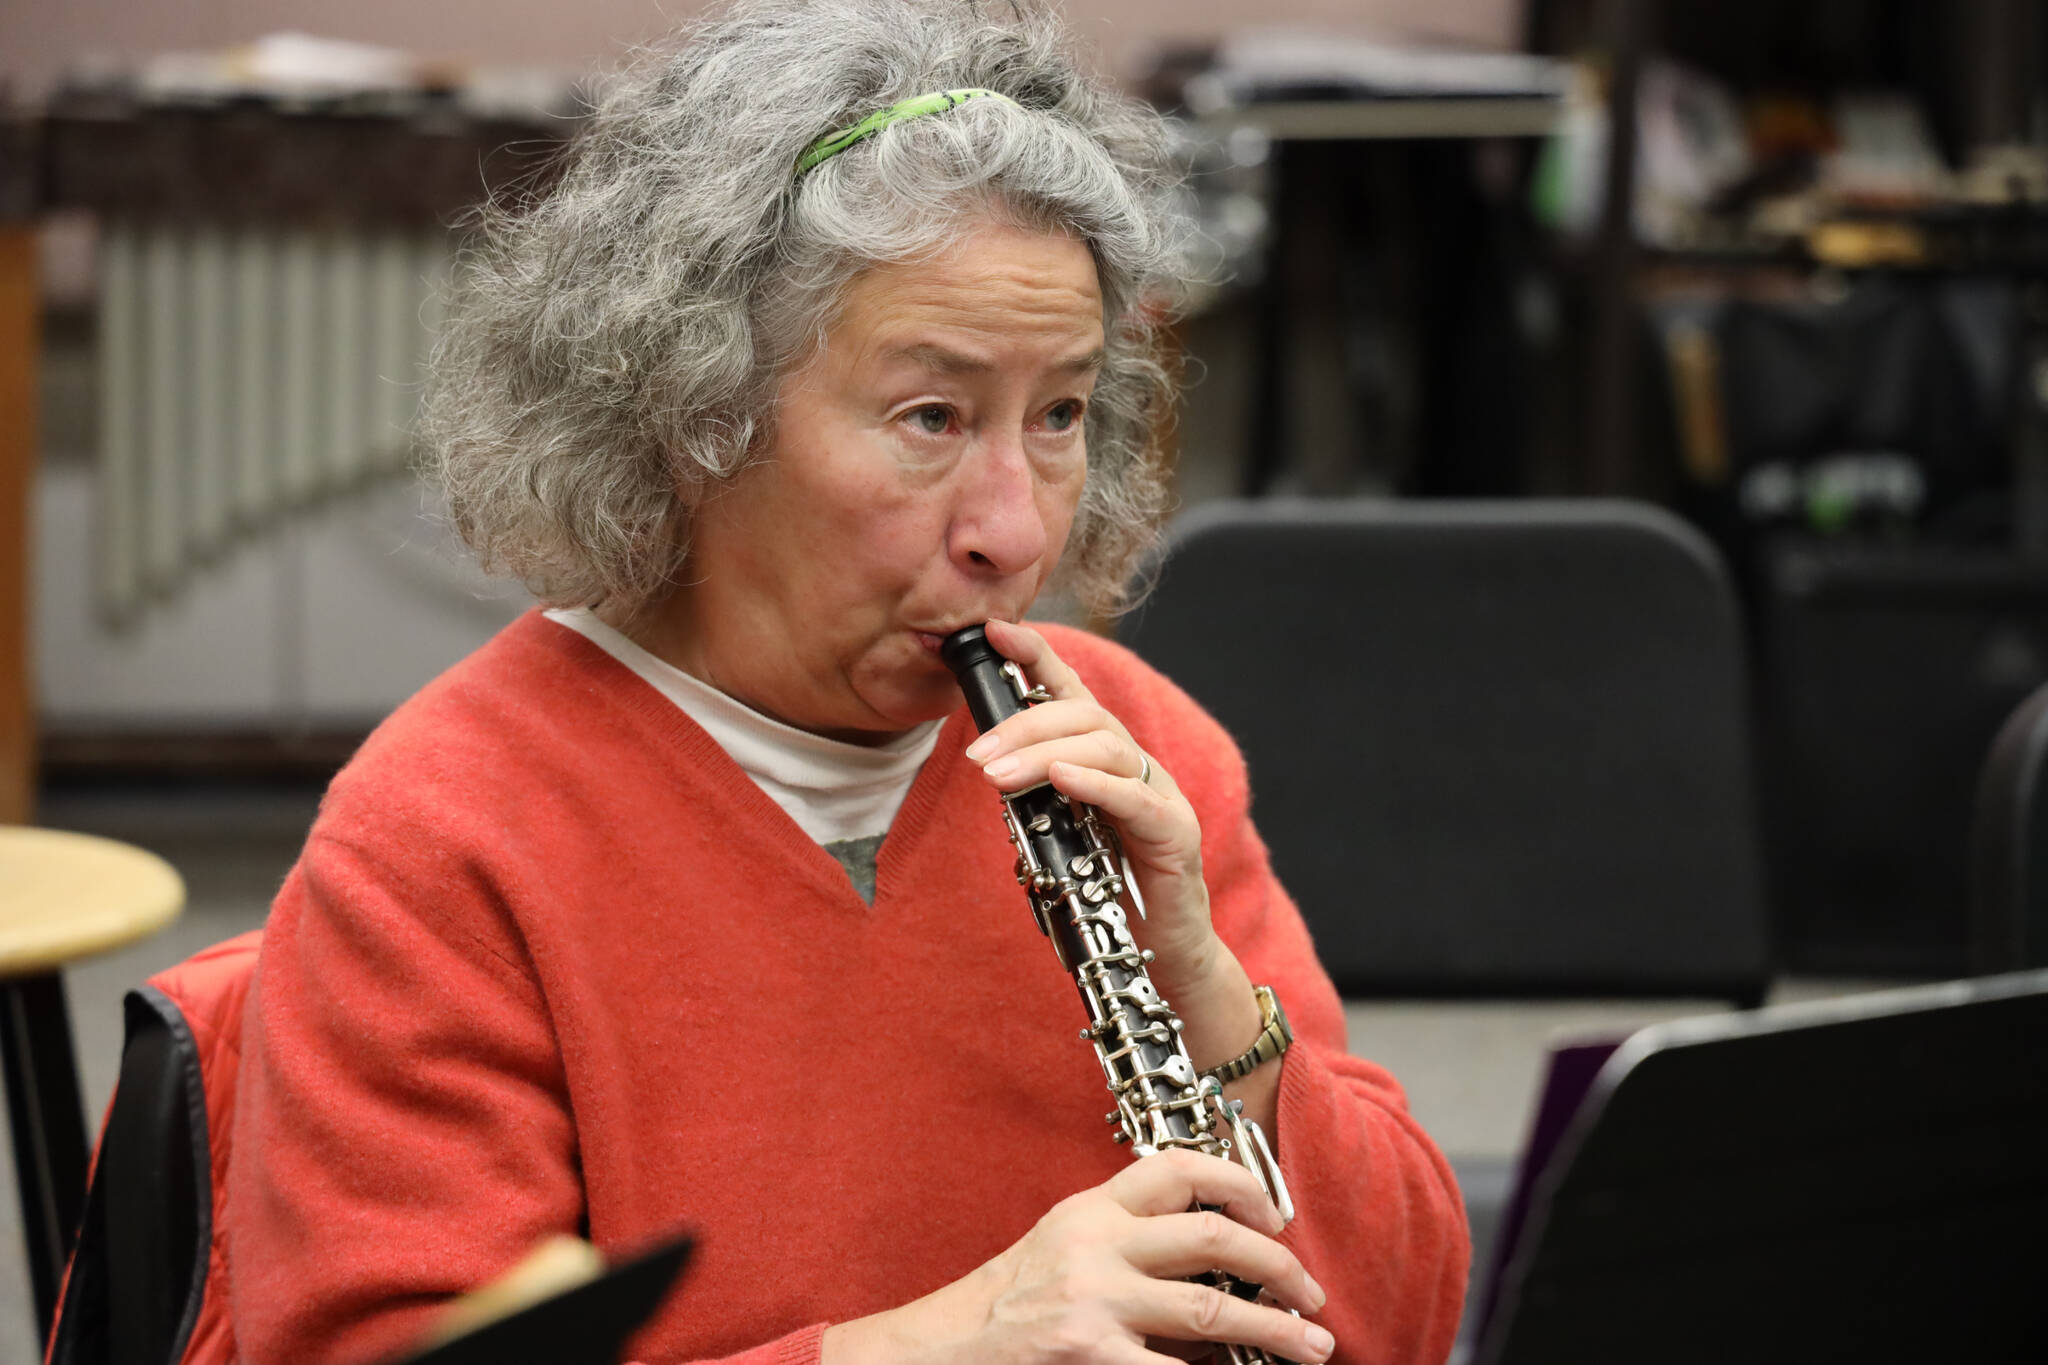 Local musician Jetta Whittaker warms up her instrument during the Con Brio Chamber Series’ Tuesday evening rehearsal. (Clarise Larson / Juneau Empire)